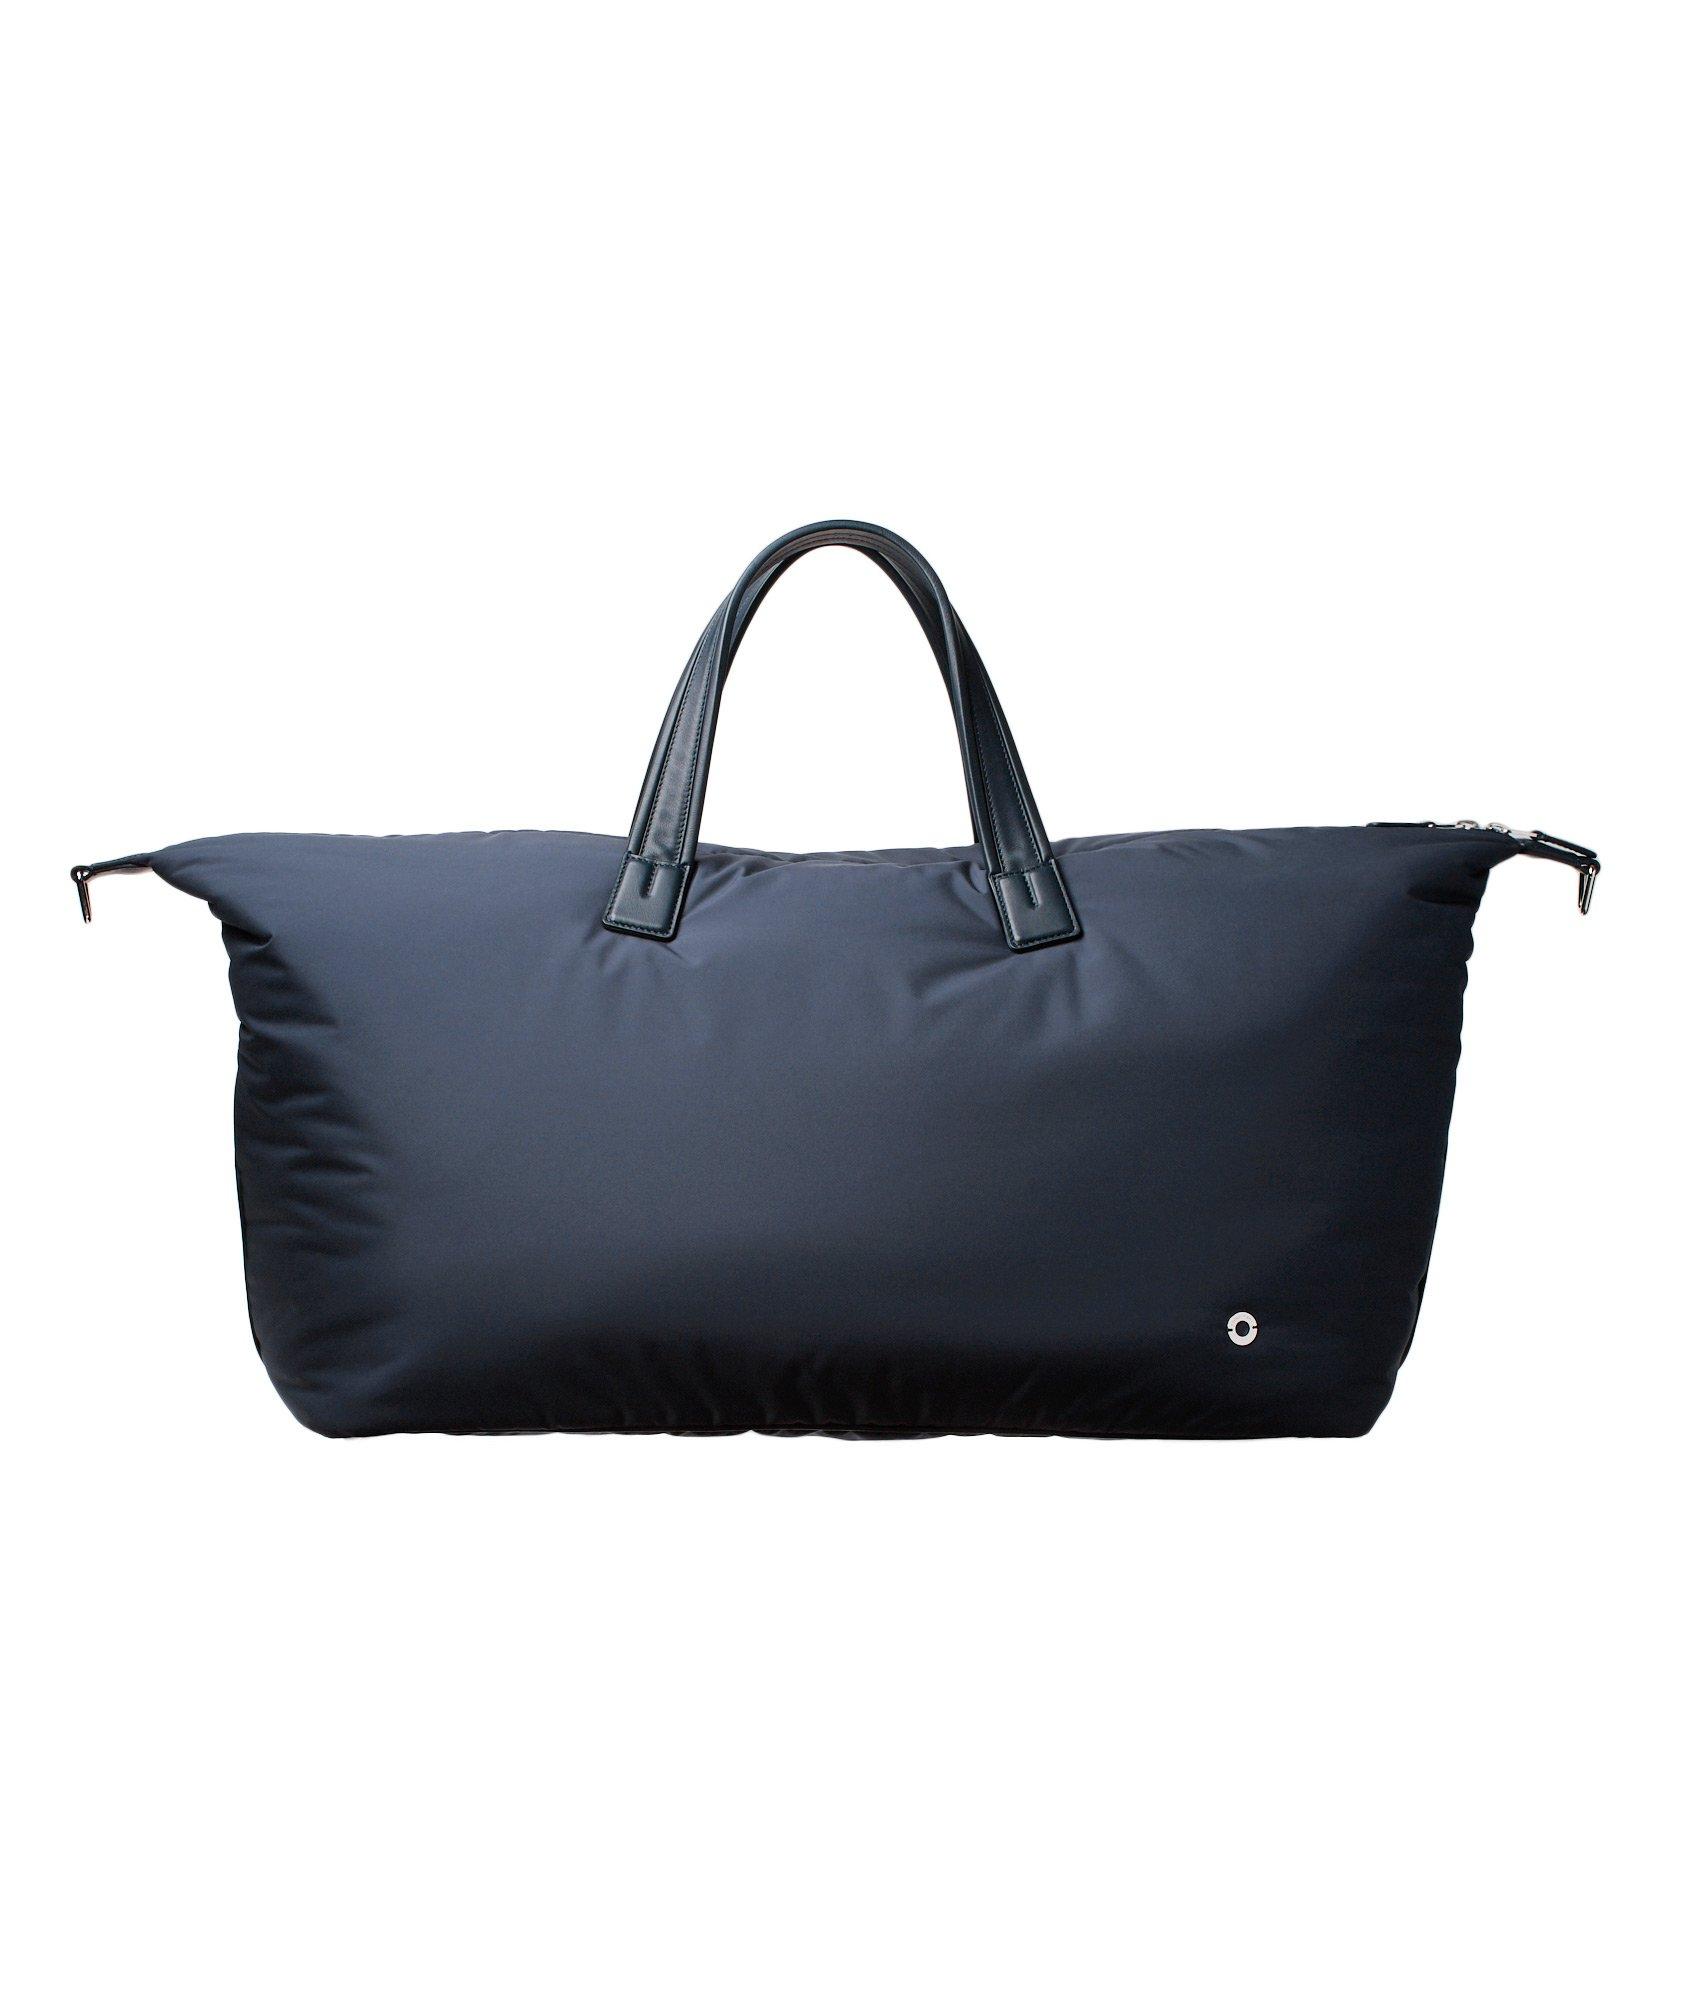 Sac souple, collection Voyager image 0